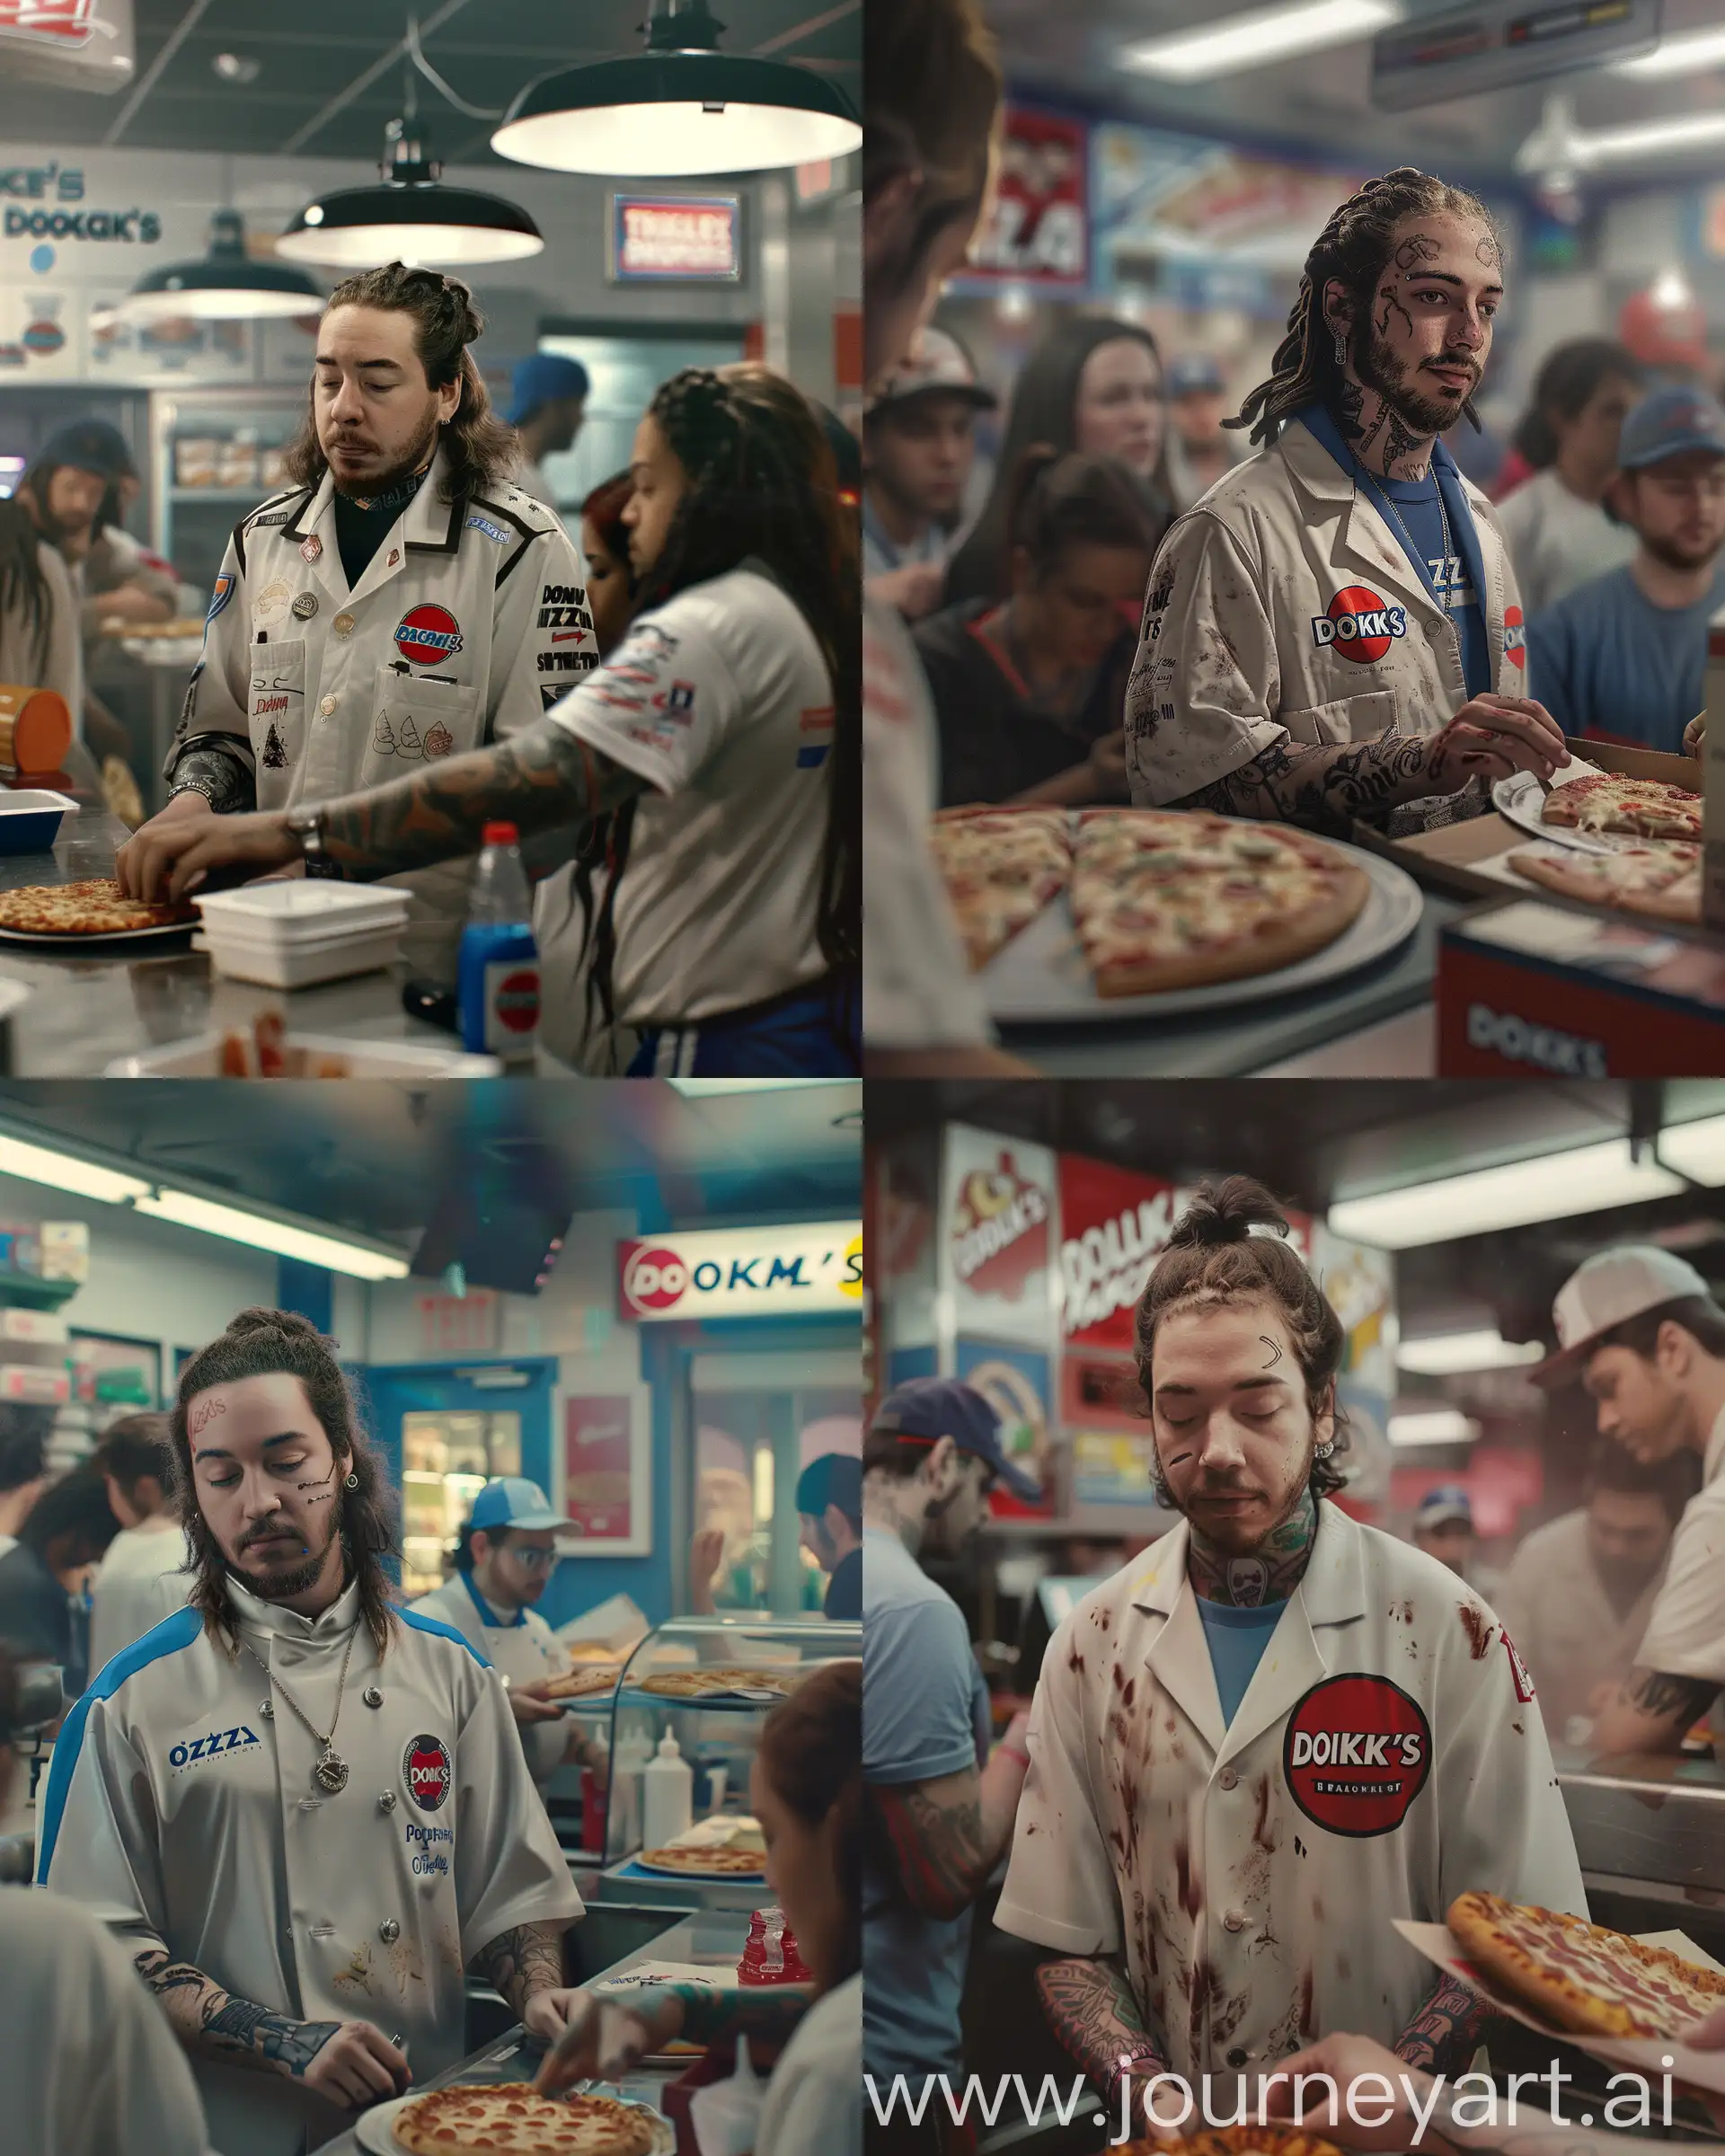 "Experience the hustle and bustle of a busy fast food restaurant through the eyes of The Post Malone, captured in a hyperrealistic photograph as he serves Domino's Pizza to customers in his Domino's uniform." --ar 4:5